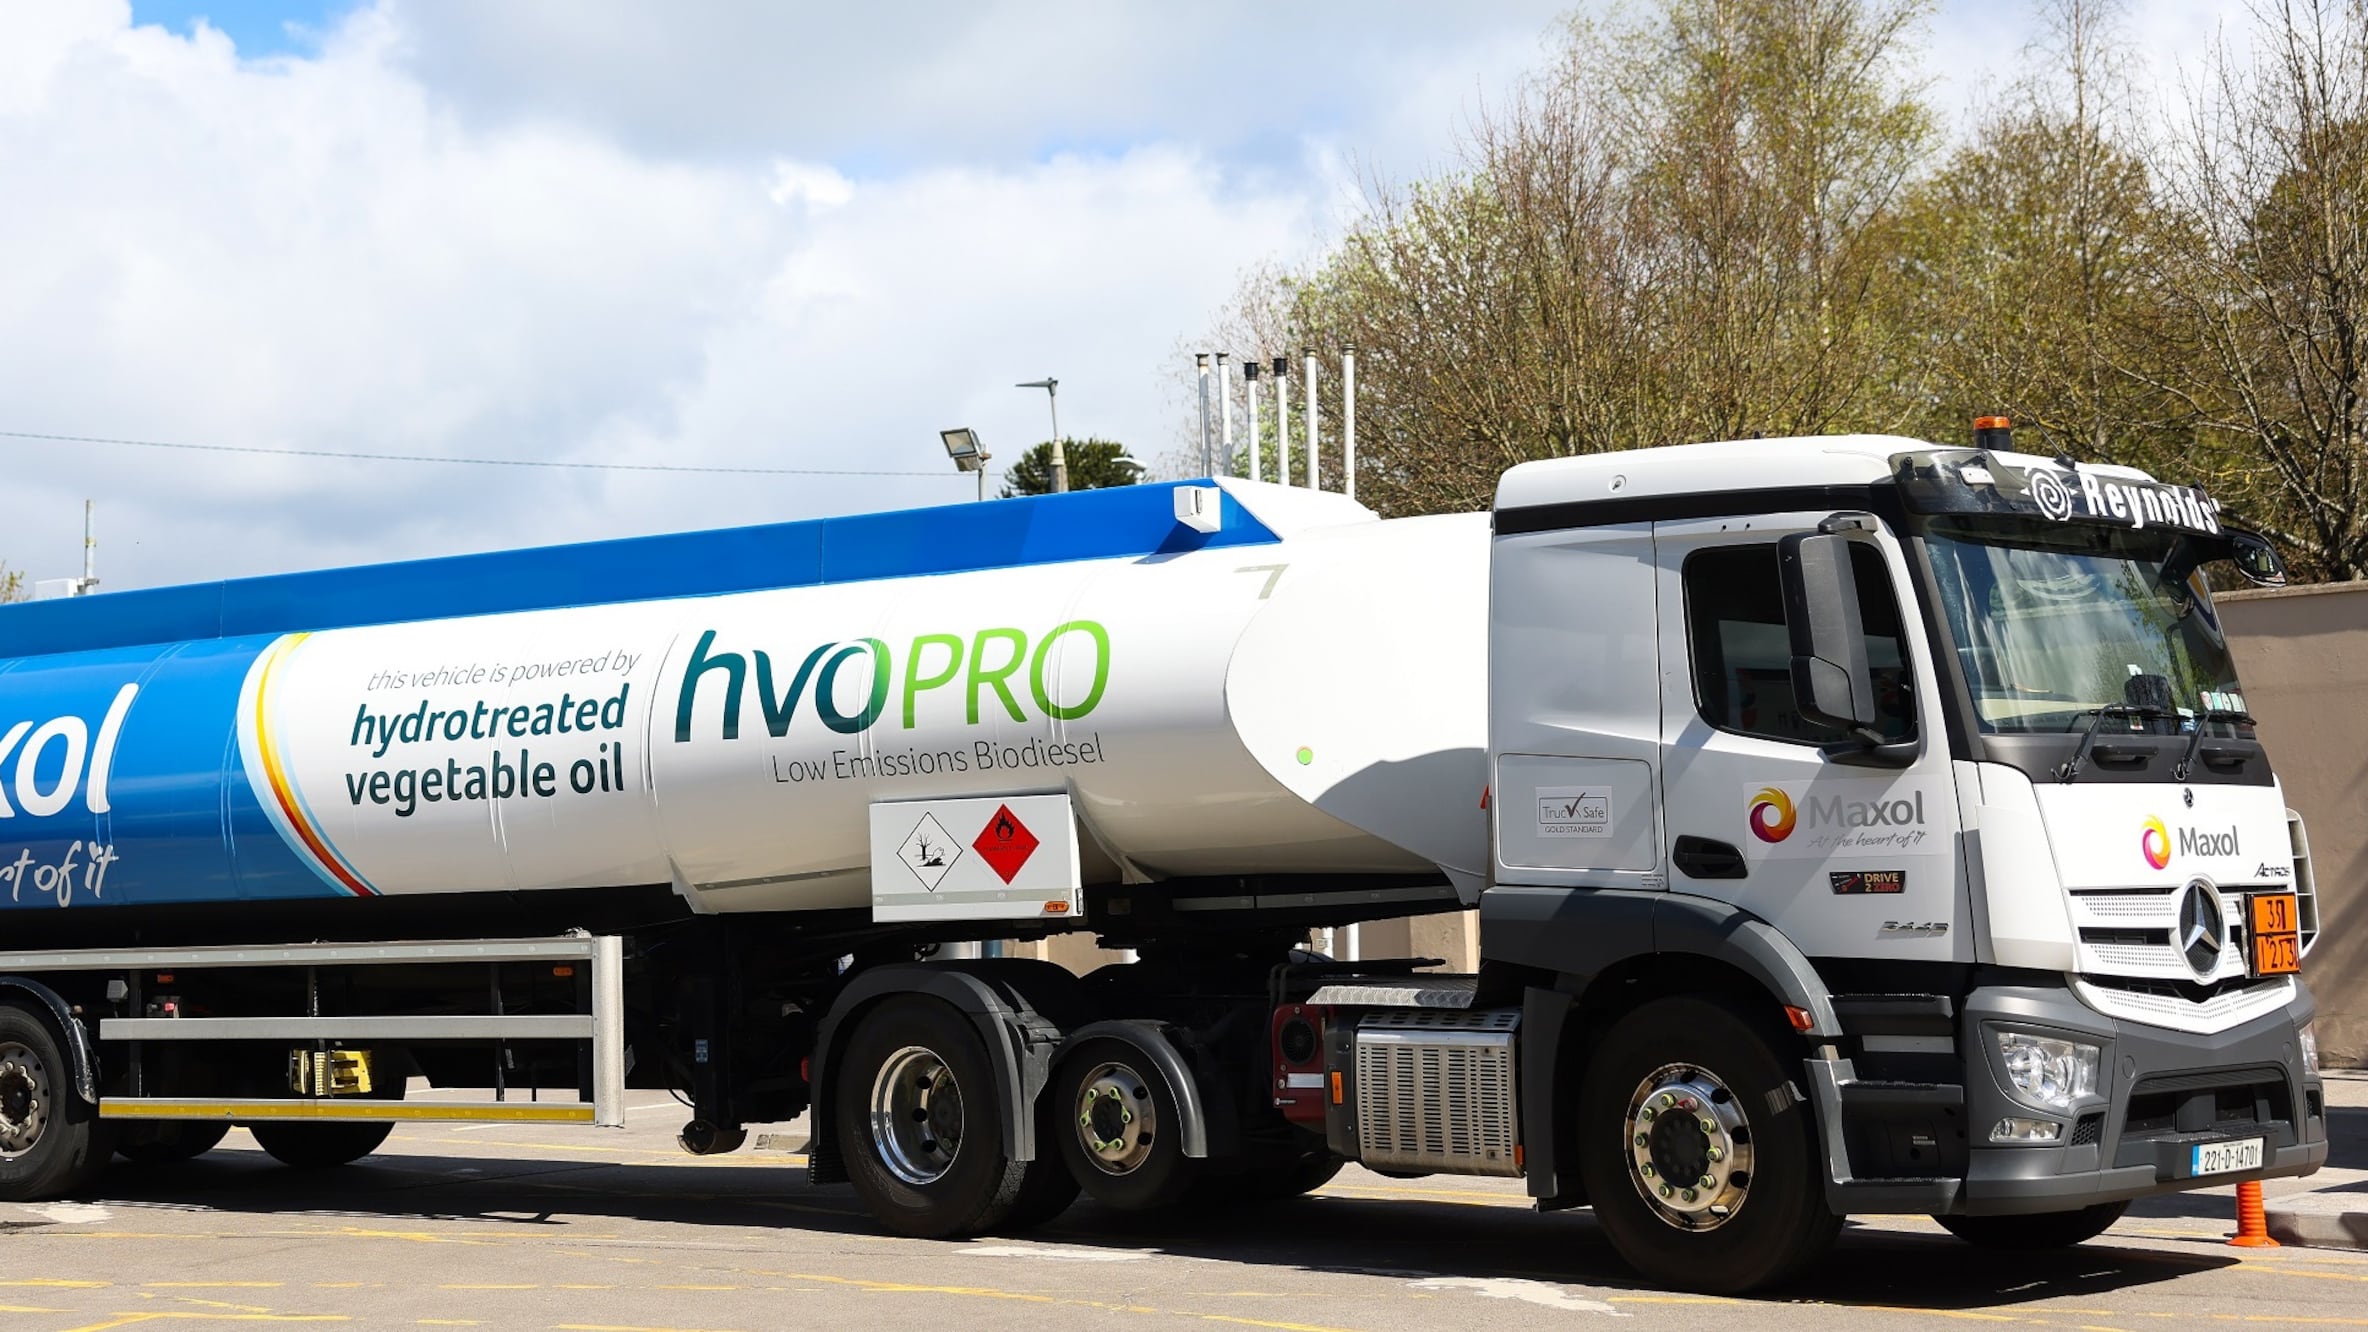 Maxol branded fuel tanker lorry with hvoPRO lettering.